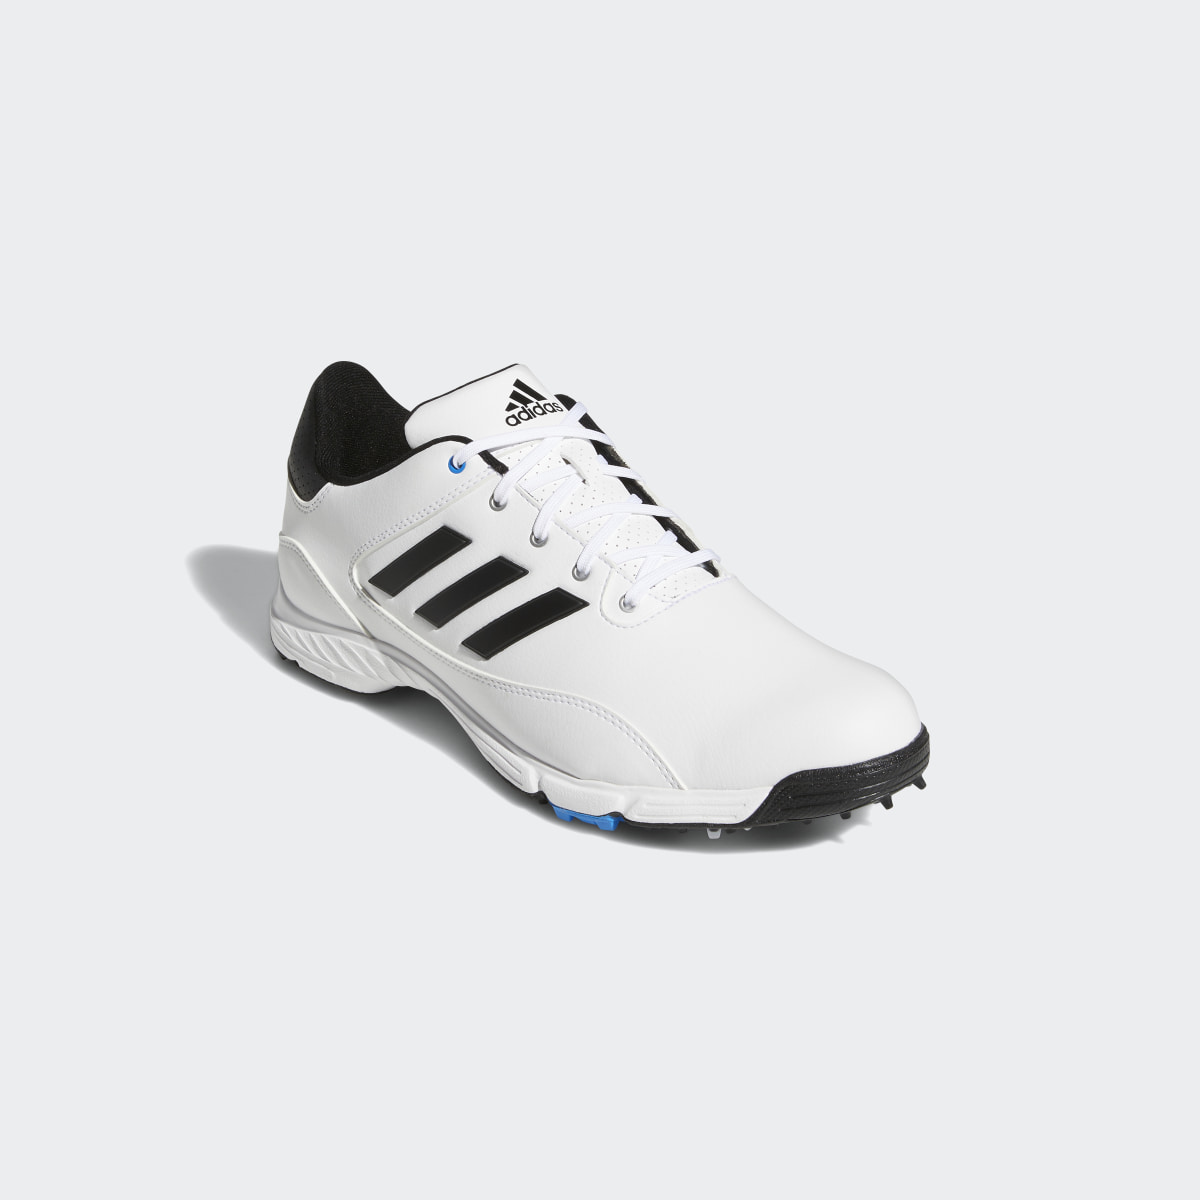 Adidas Golflite Max Wide Golf Shoes. 5